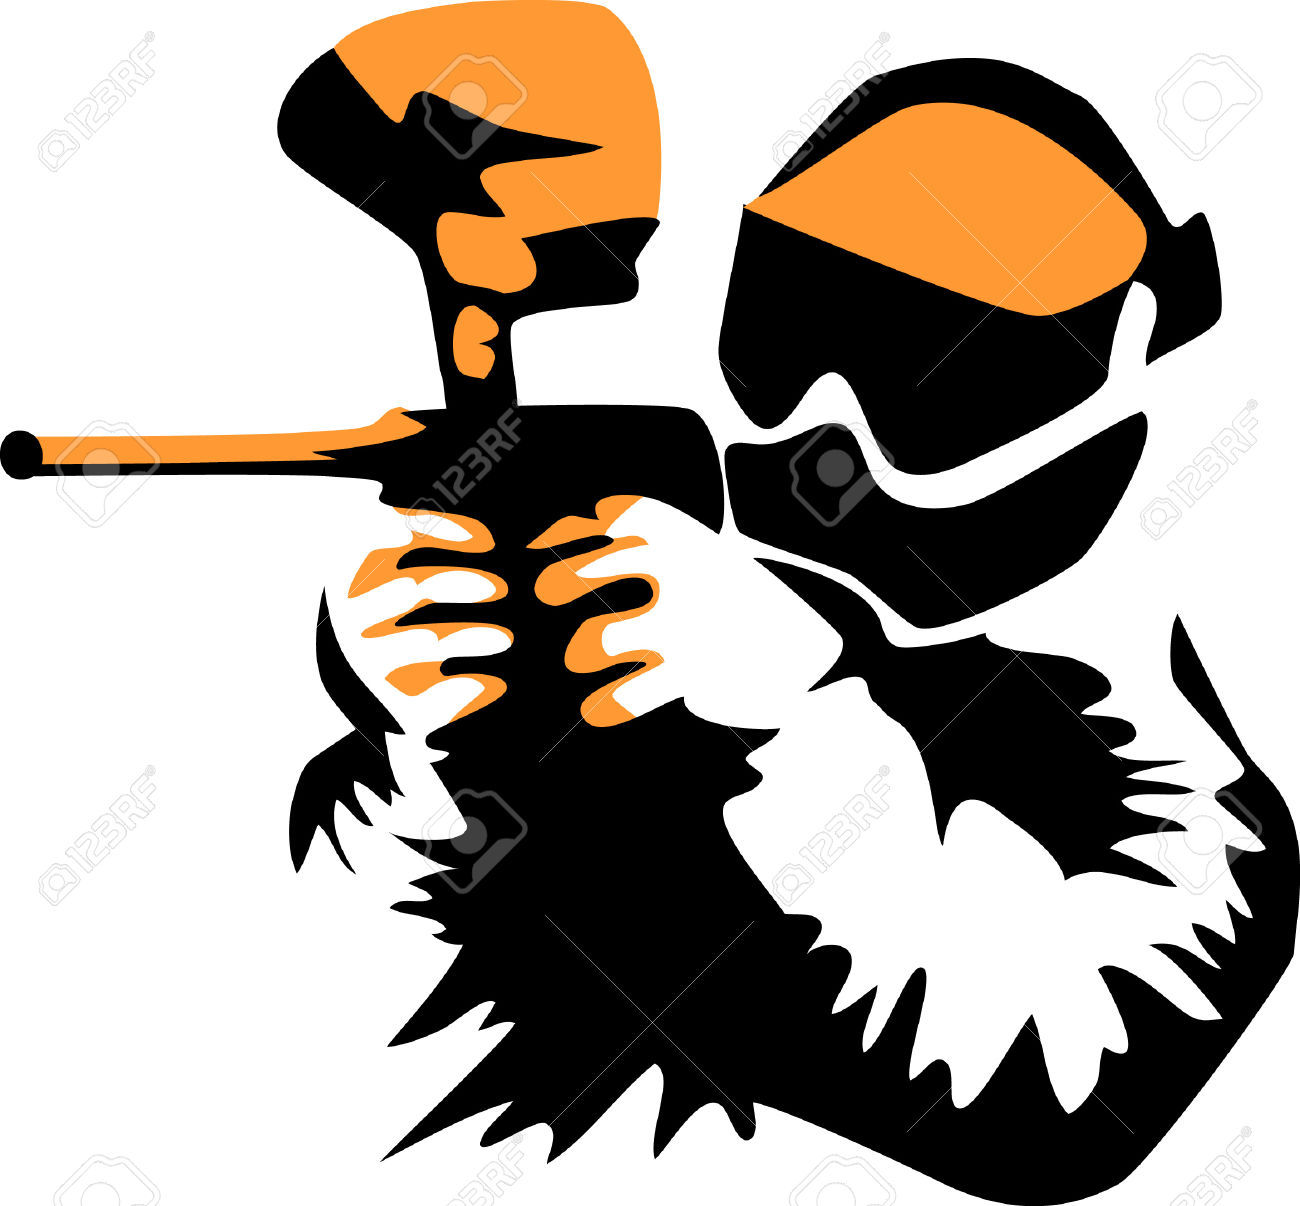 Paintball clipart paint ball. Collection of free download